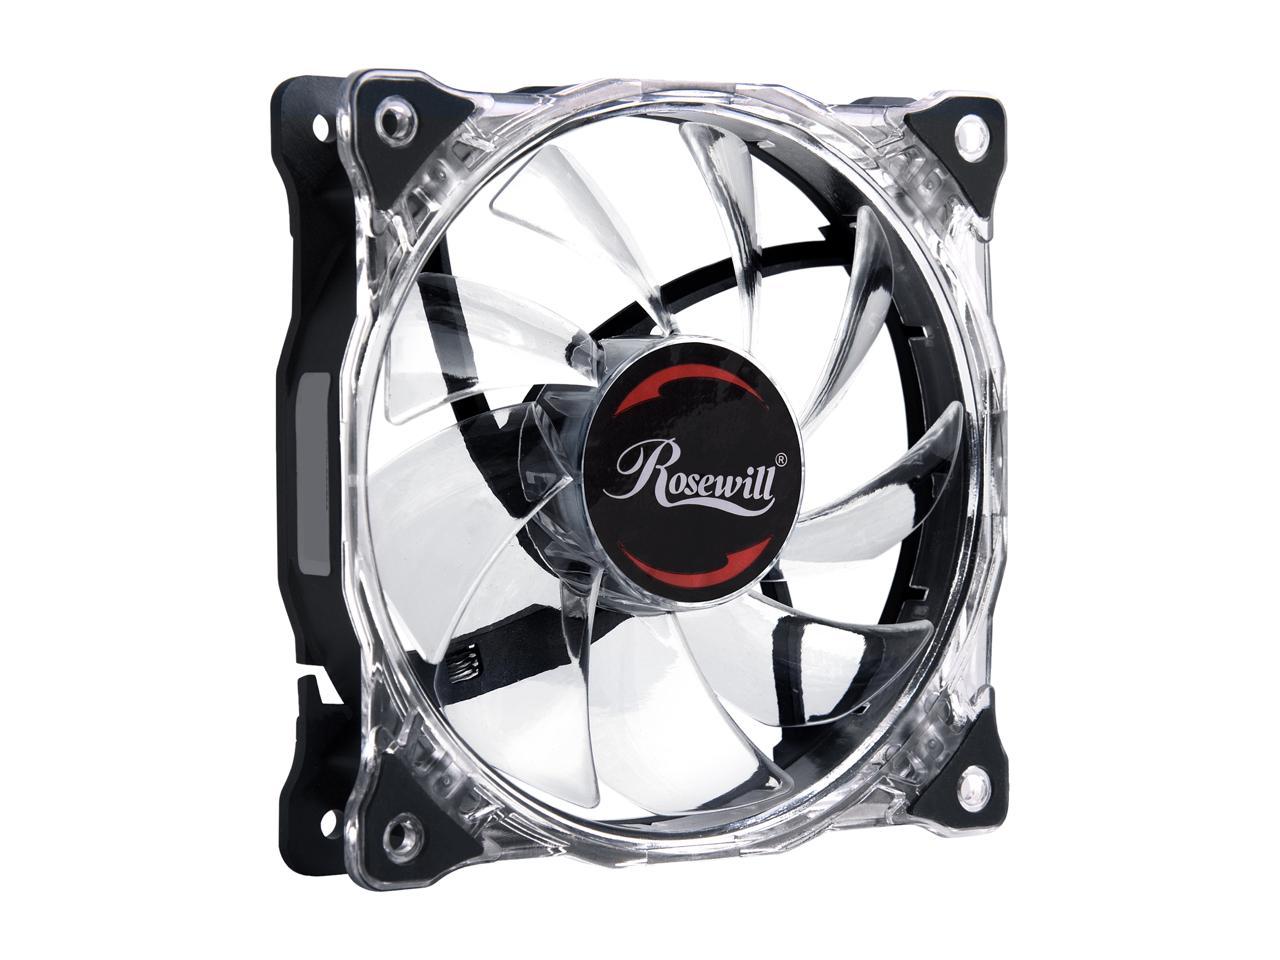 Rosewill RFA-120-WL - 120mm CULLINAN Computer Case Cooling Fan with LP4 Adapter - Semi-Transparent Frame & Blue LED Lights, Sleeve Bearing, Silent